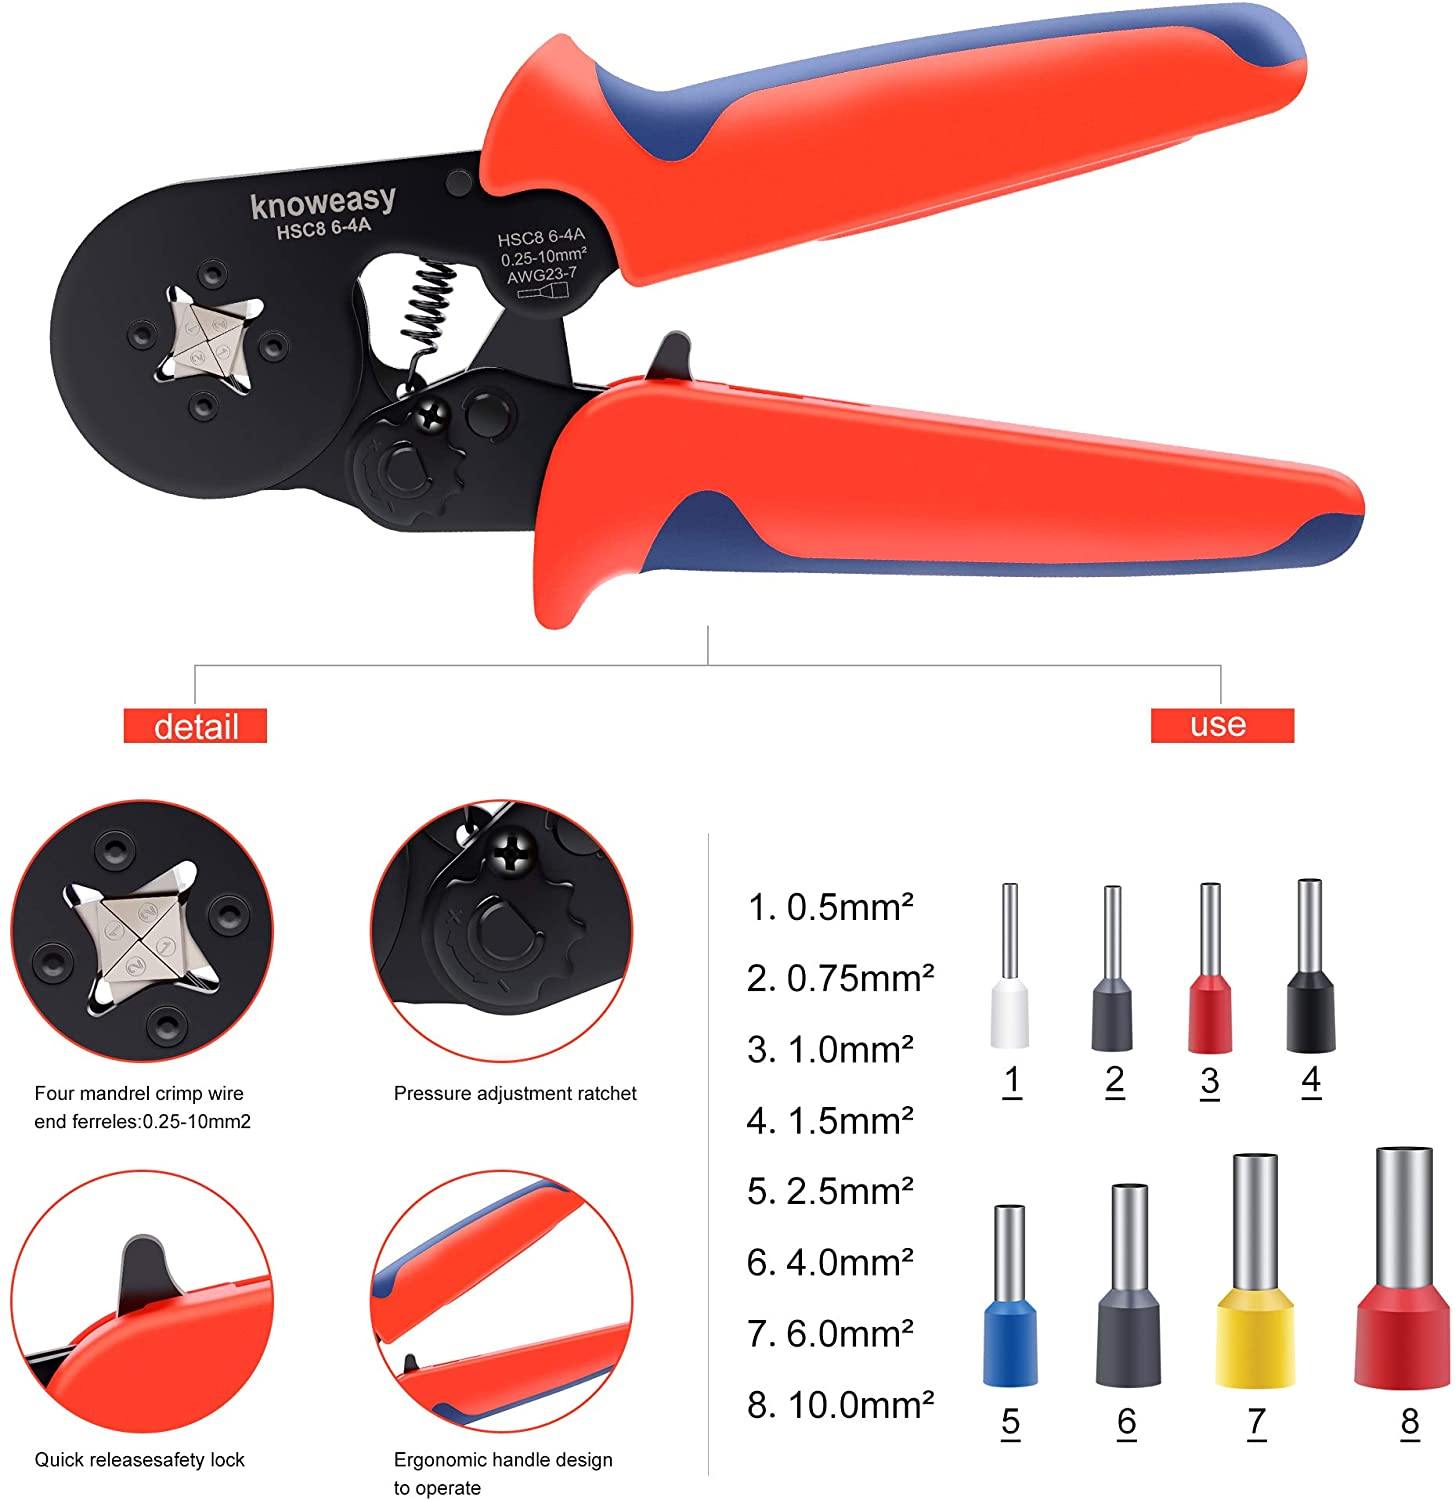 Ferrule Crimping Tool Kit,Knoweasy 6-4A Ferrule Crimper and 2 in 1 Wire  Stripping Tool Cutting 5-20mm/(0.25-0.75inch) with 1200PCS Wire Terminals